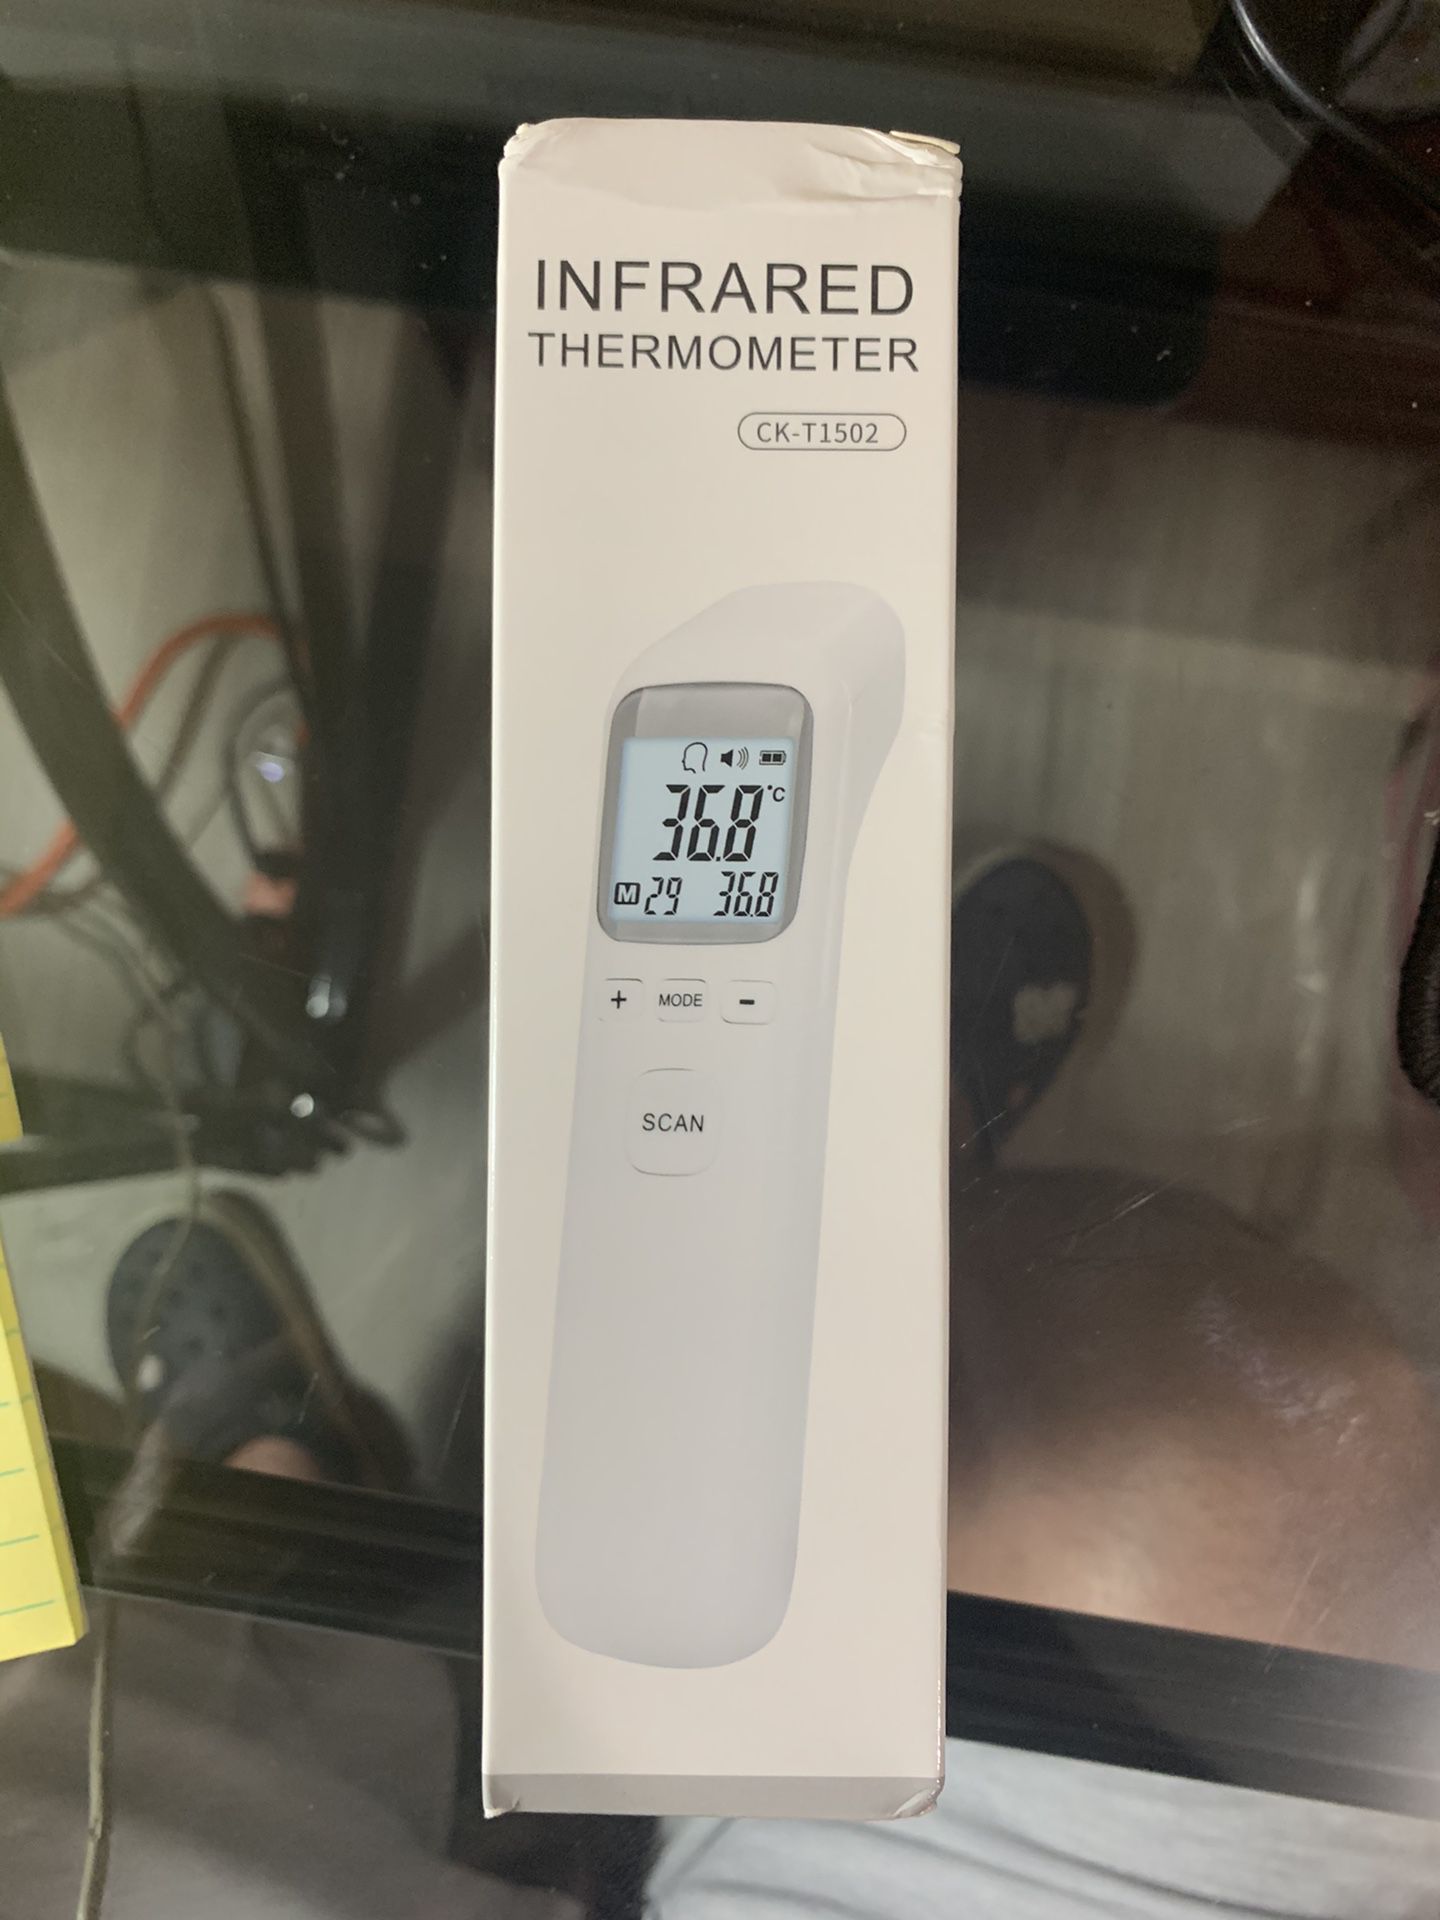 CK-T1502 Non-contact R11 Body Thermometer Forehead Digital Infrared Thermometer Portable Digital